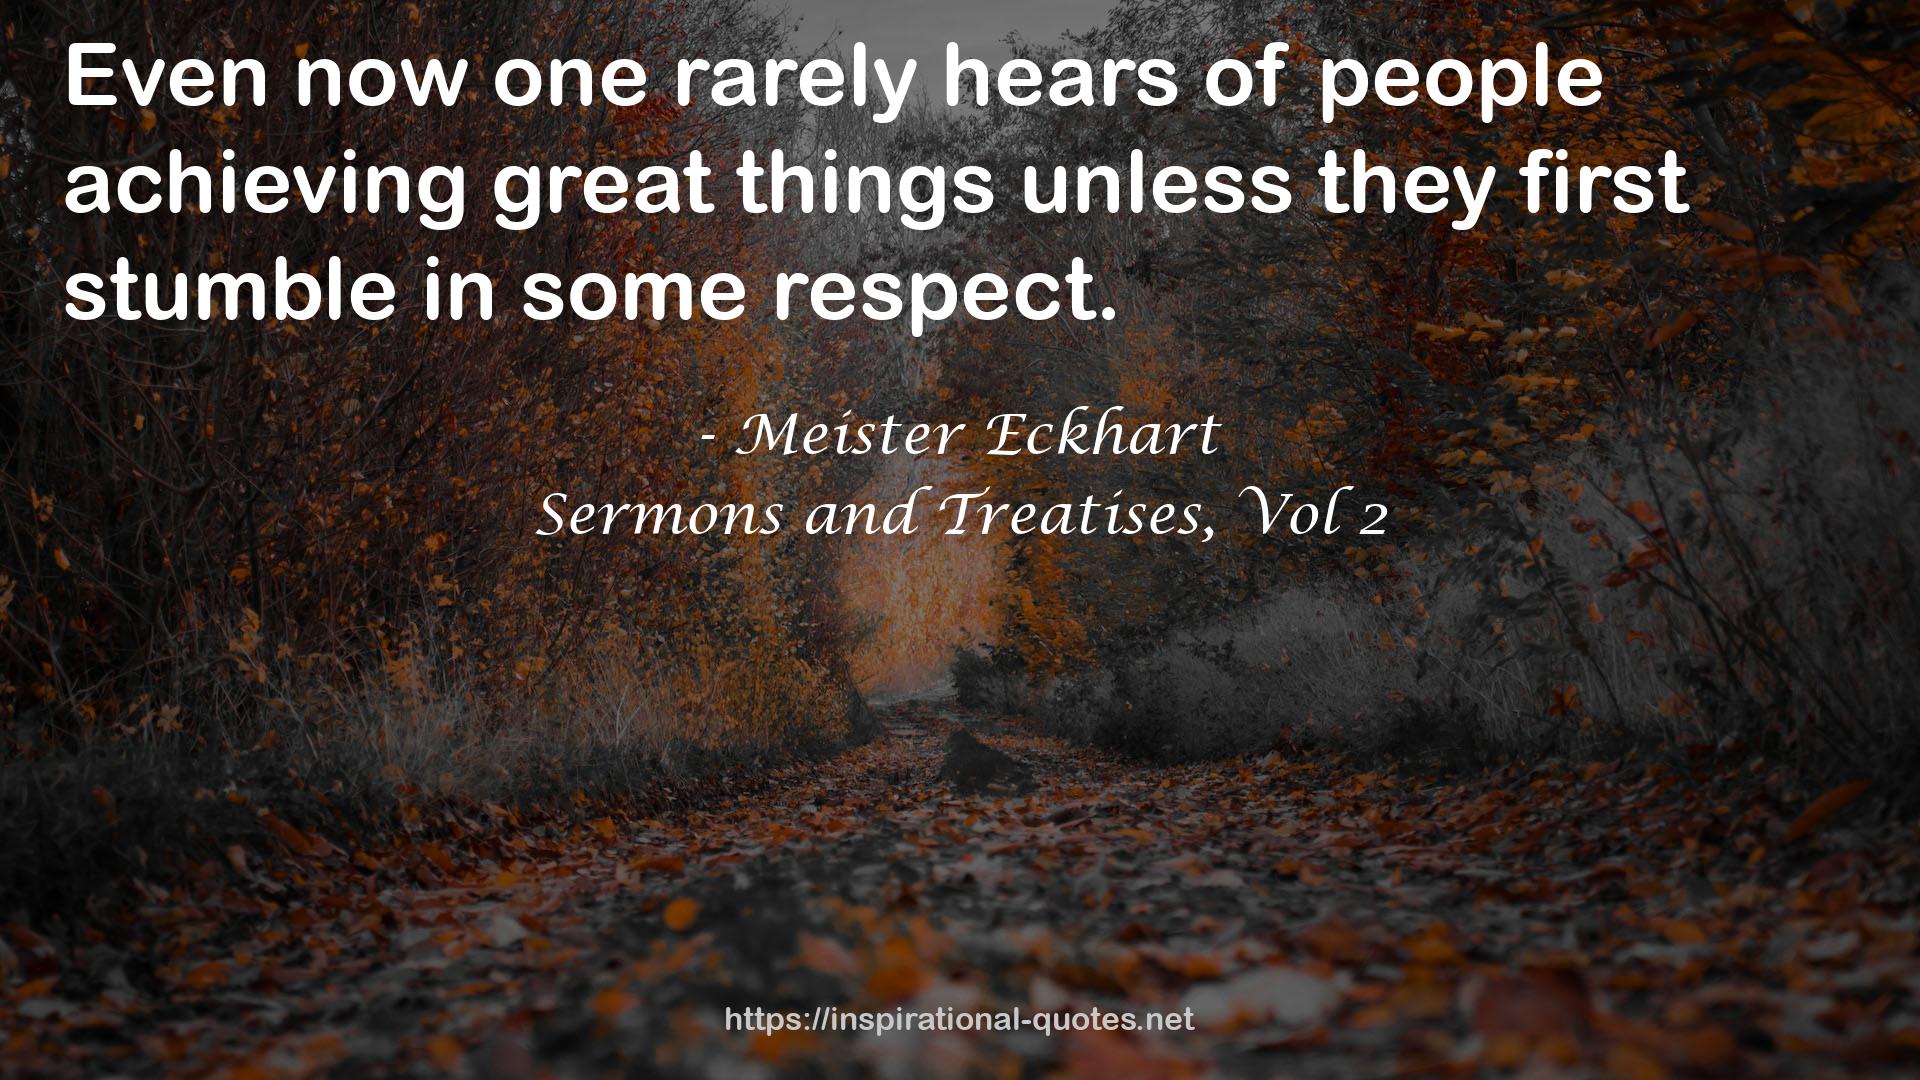 Sermons and Treatises, Vol 2 QUOTES